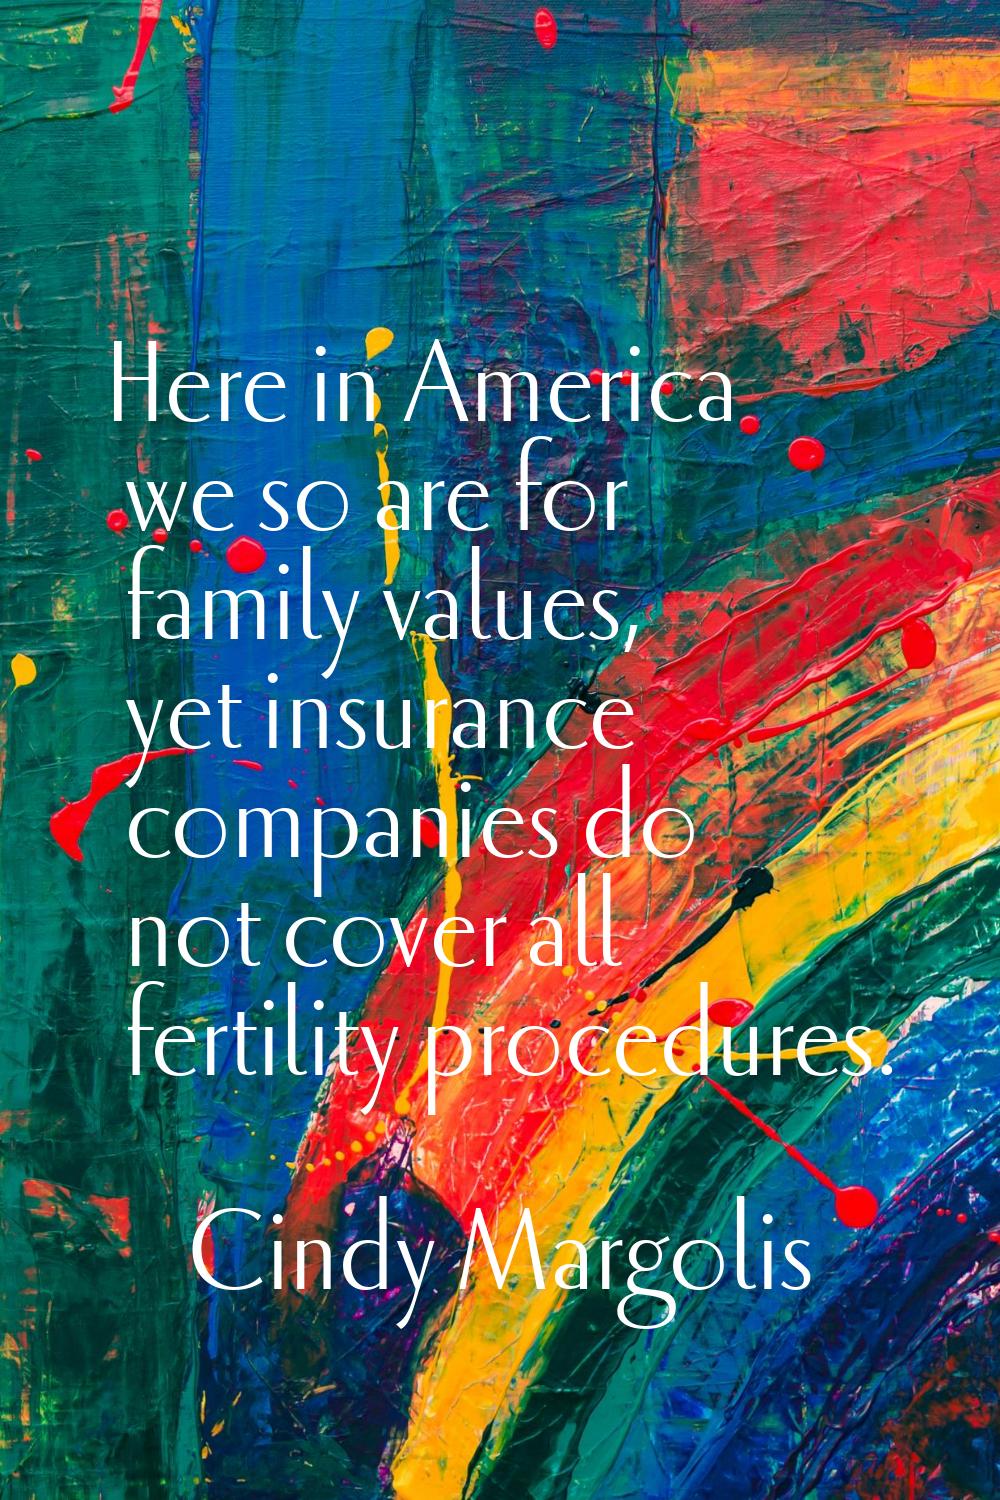 Here in America we so are for family values, yet insurance companies do not cover all fertility pro